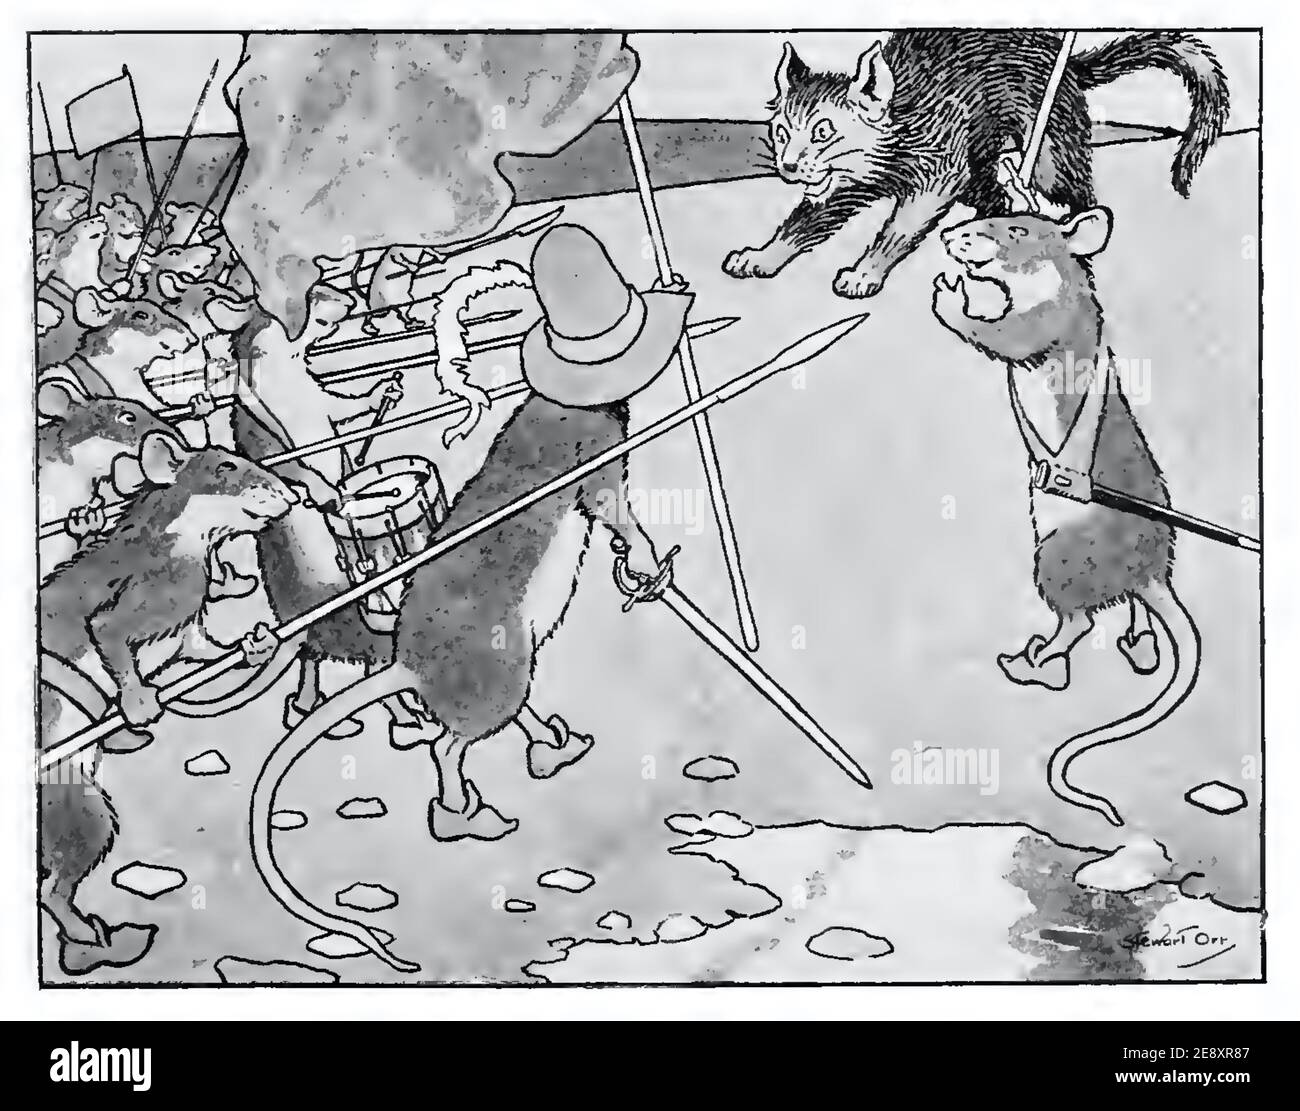 Stewart Orr cartoon showing a band of mice with pike-staffs in confrontation with a cat. The end result, unfortunately, is too graphic to shown here. Stock Photo